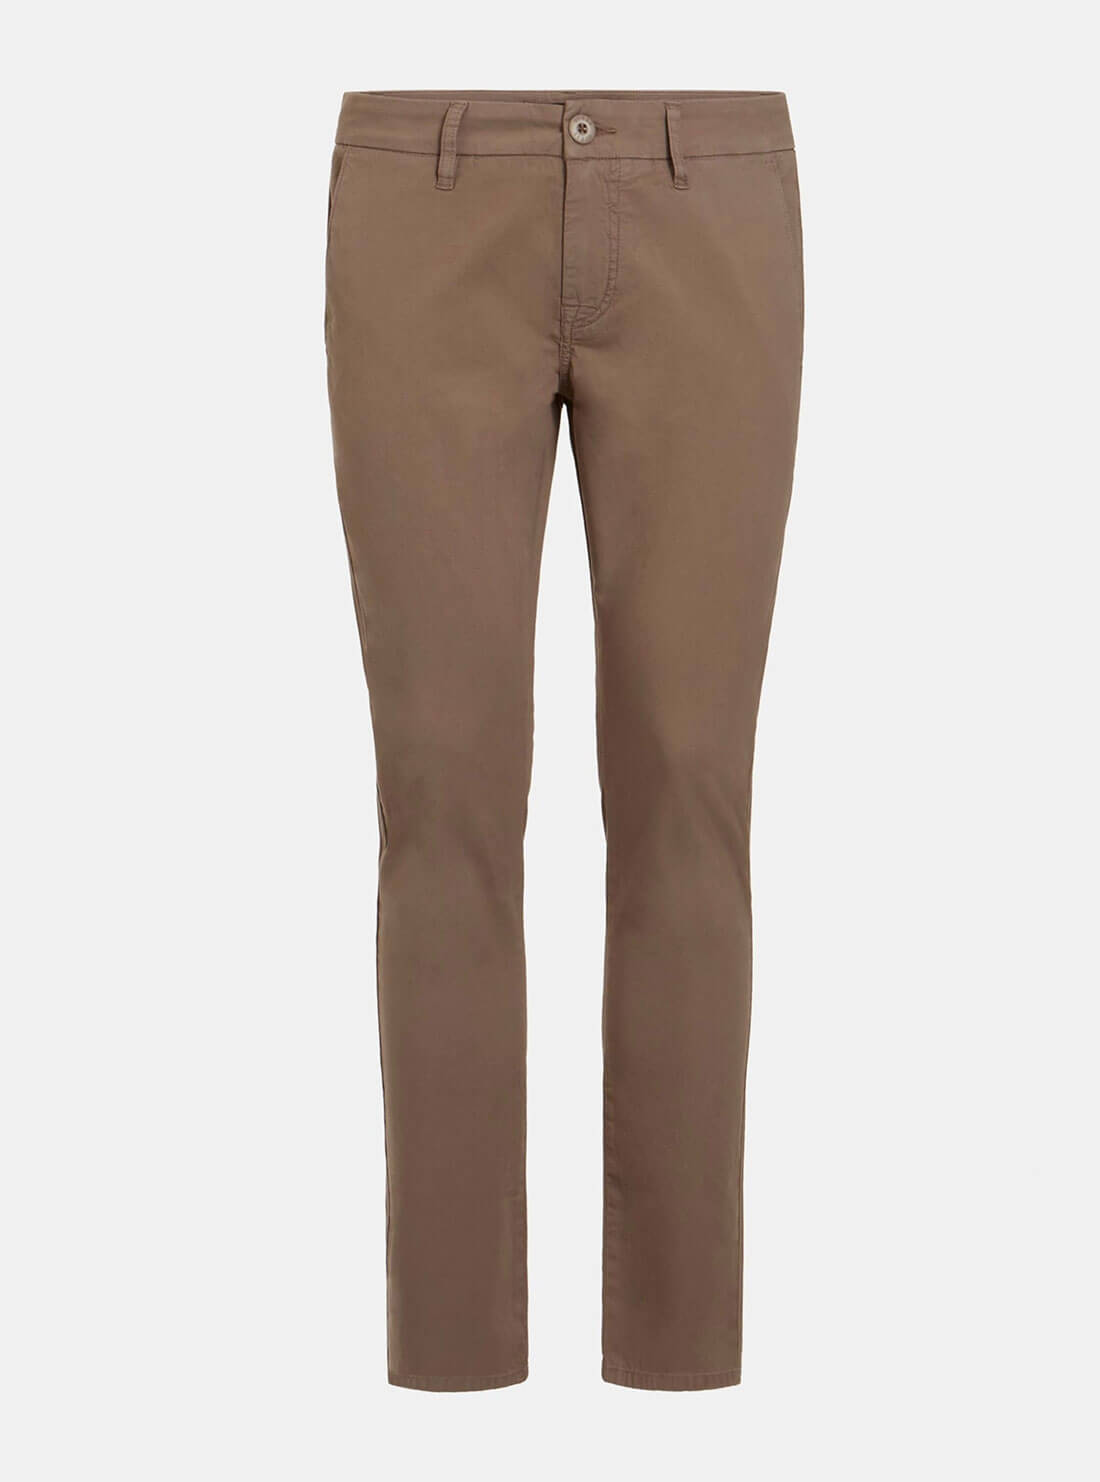 GUESS Mens Walnut Brown Daniel Skinny Fit Pants M2GB29WEI53 Ghost Front View